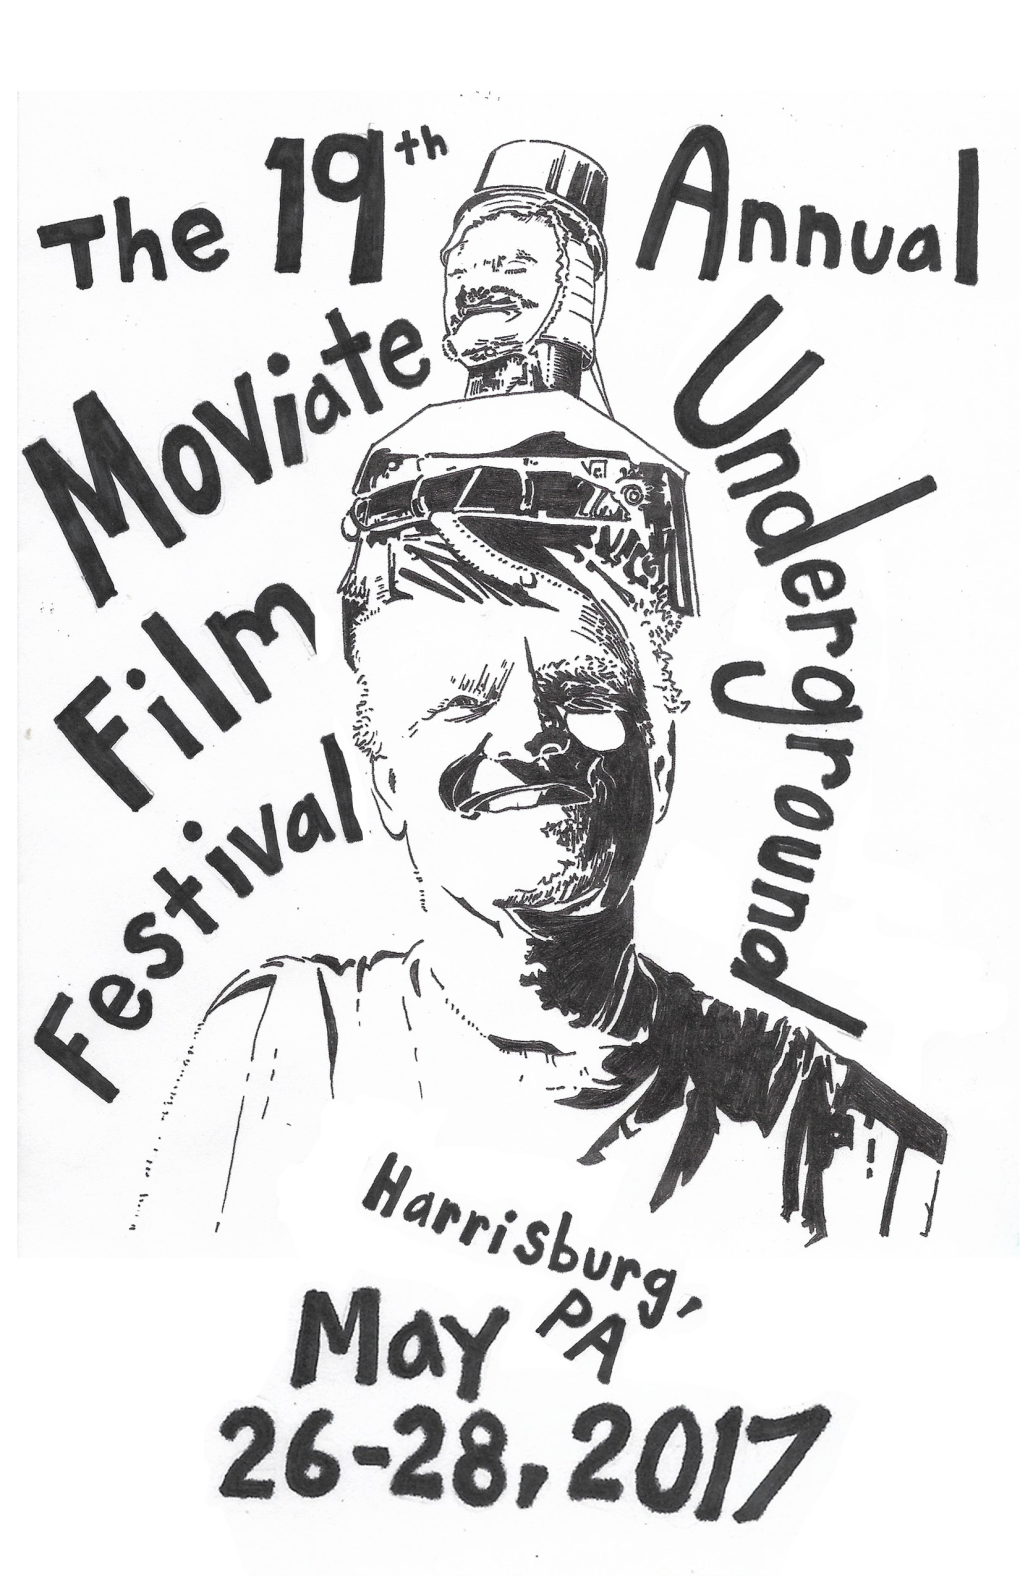 Moviate Underground Film Festival at ARTSFEST May 26Th-28Th, 2017